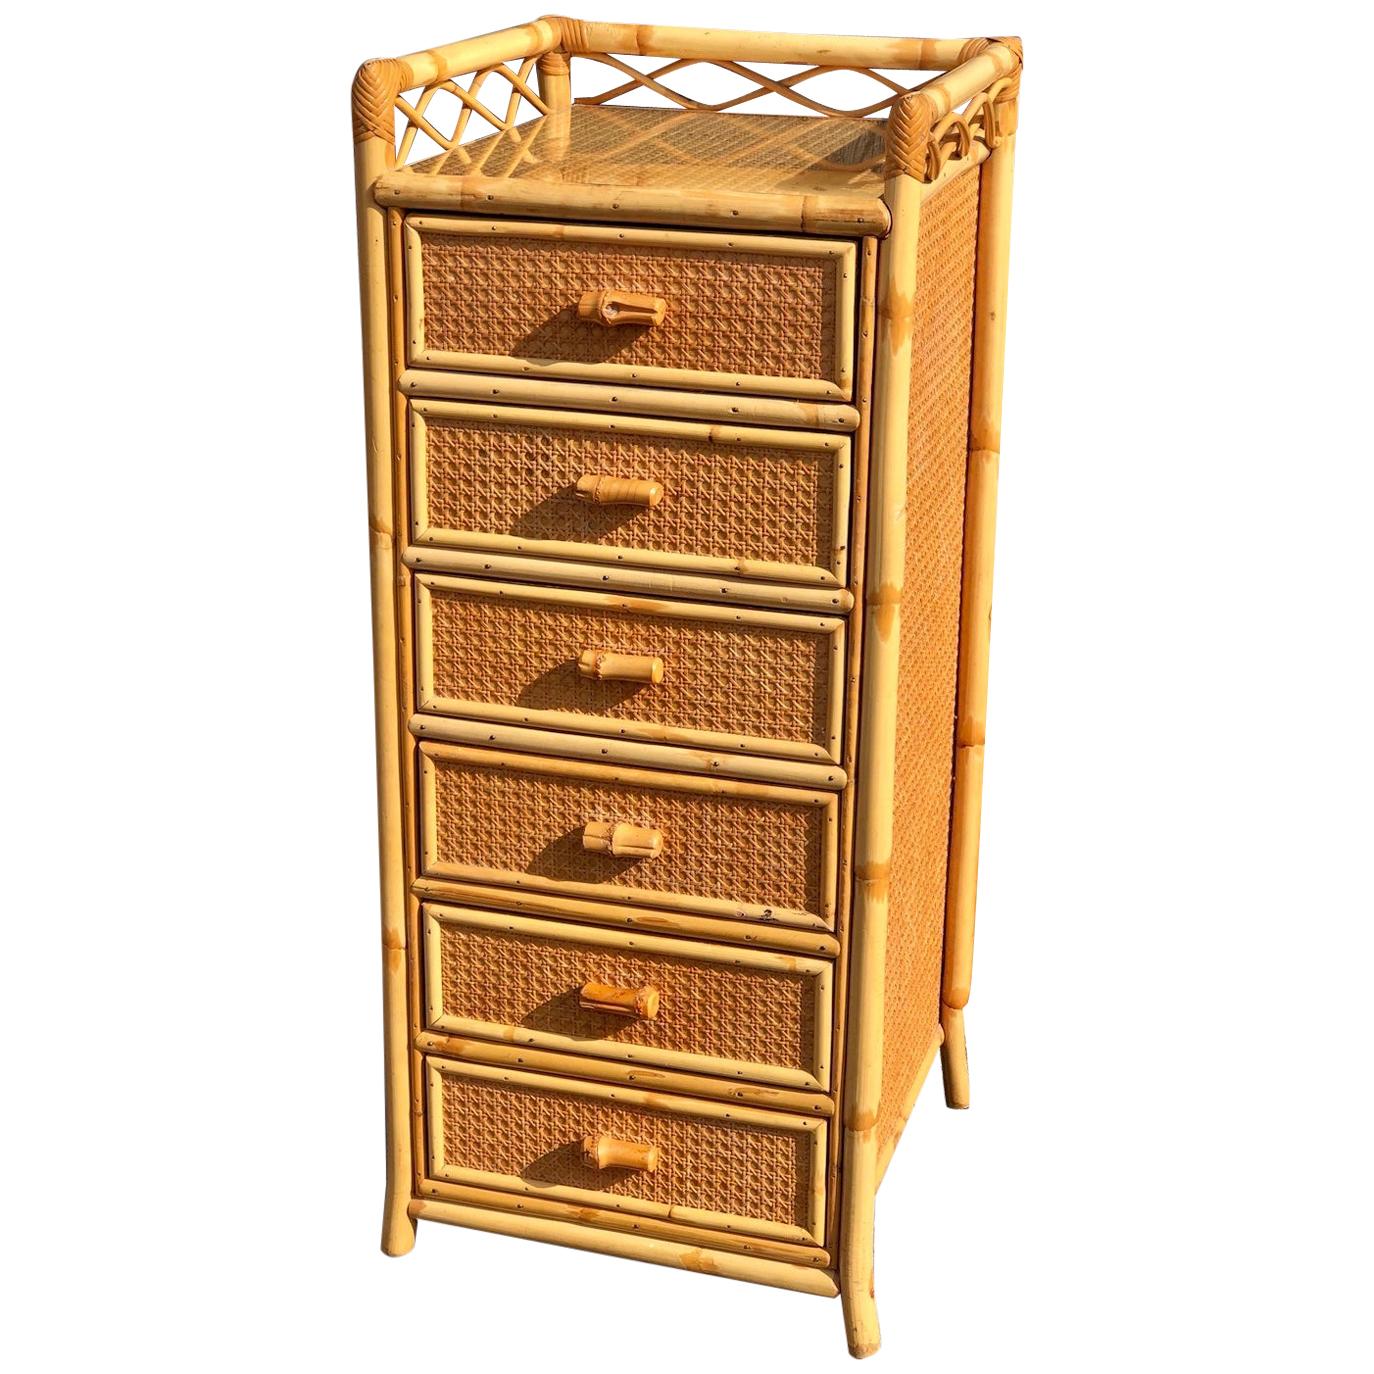 Midcentury Rattan Highboy / Tallboy Chest of Drawers by Angraves, England, 1970s For Sale